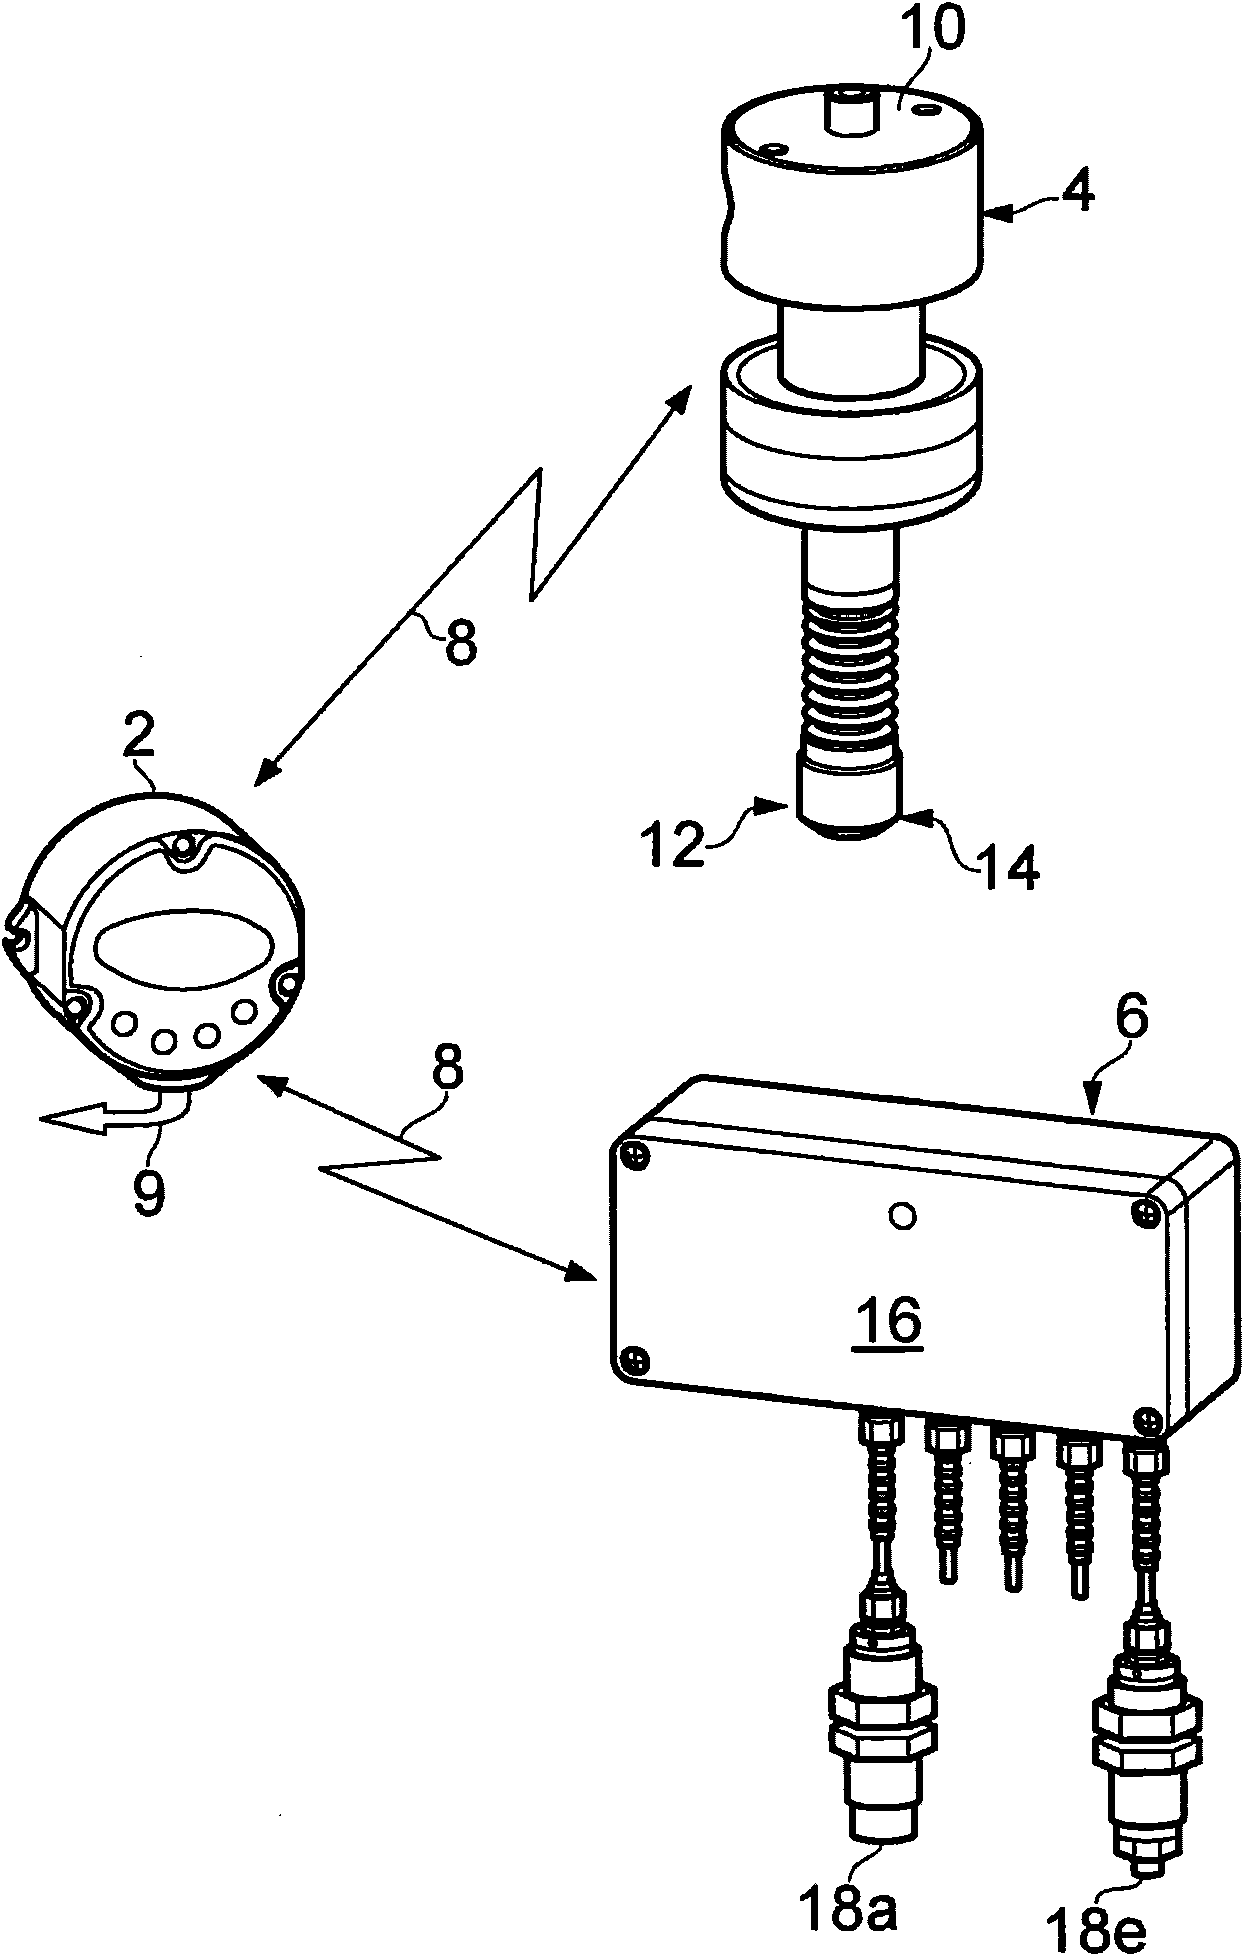 Wireless communications device and method